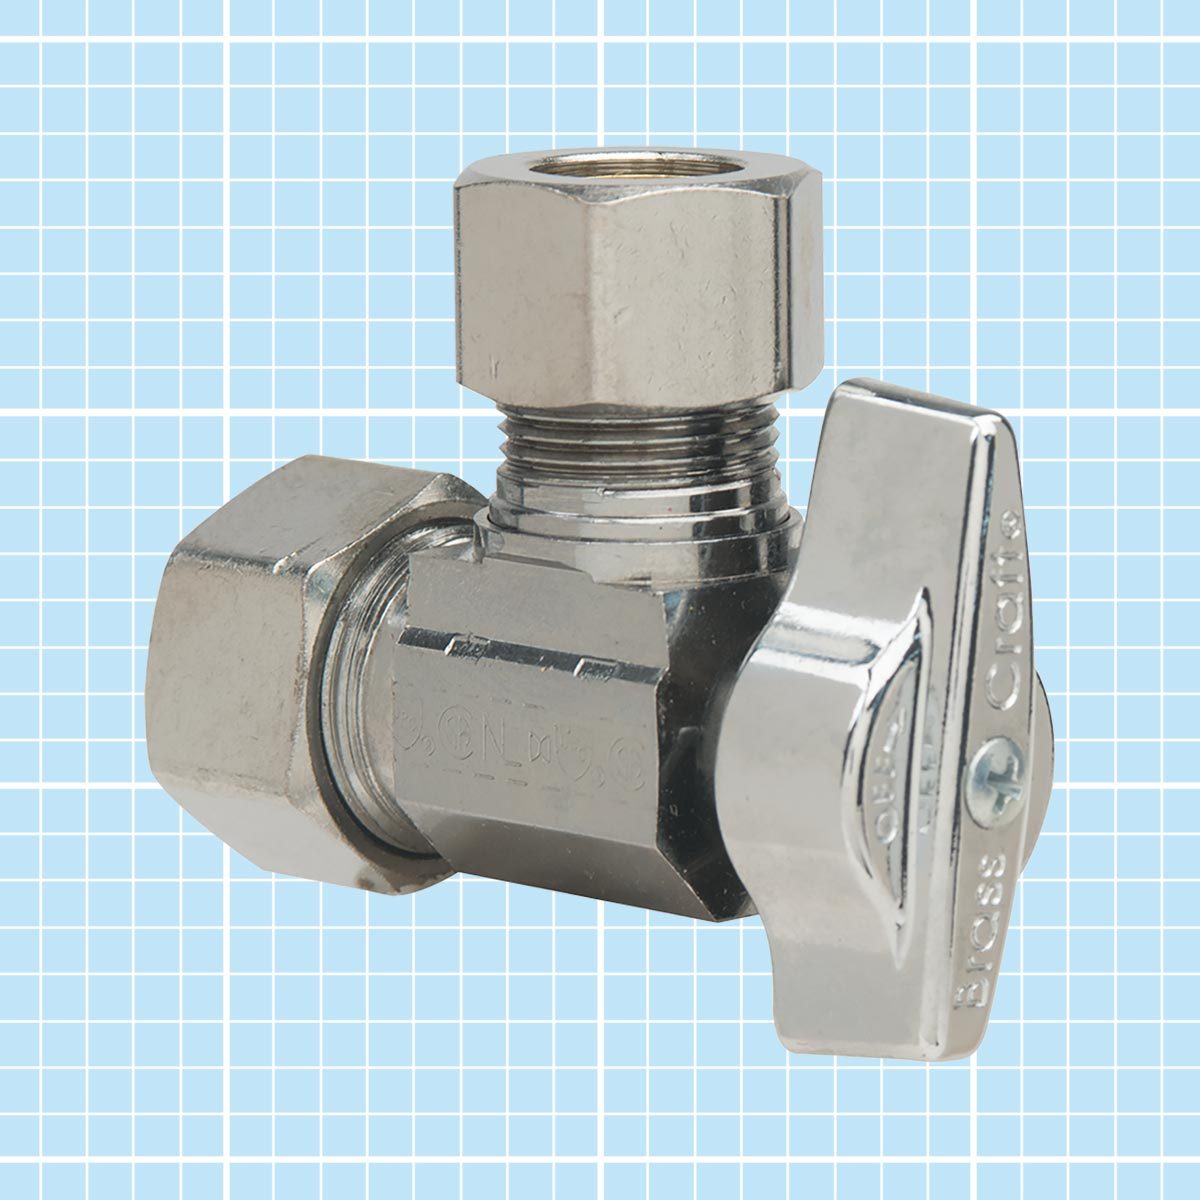 What Is a Ball Valve and Why Should I Use Them In My Home?